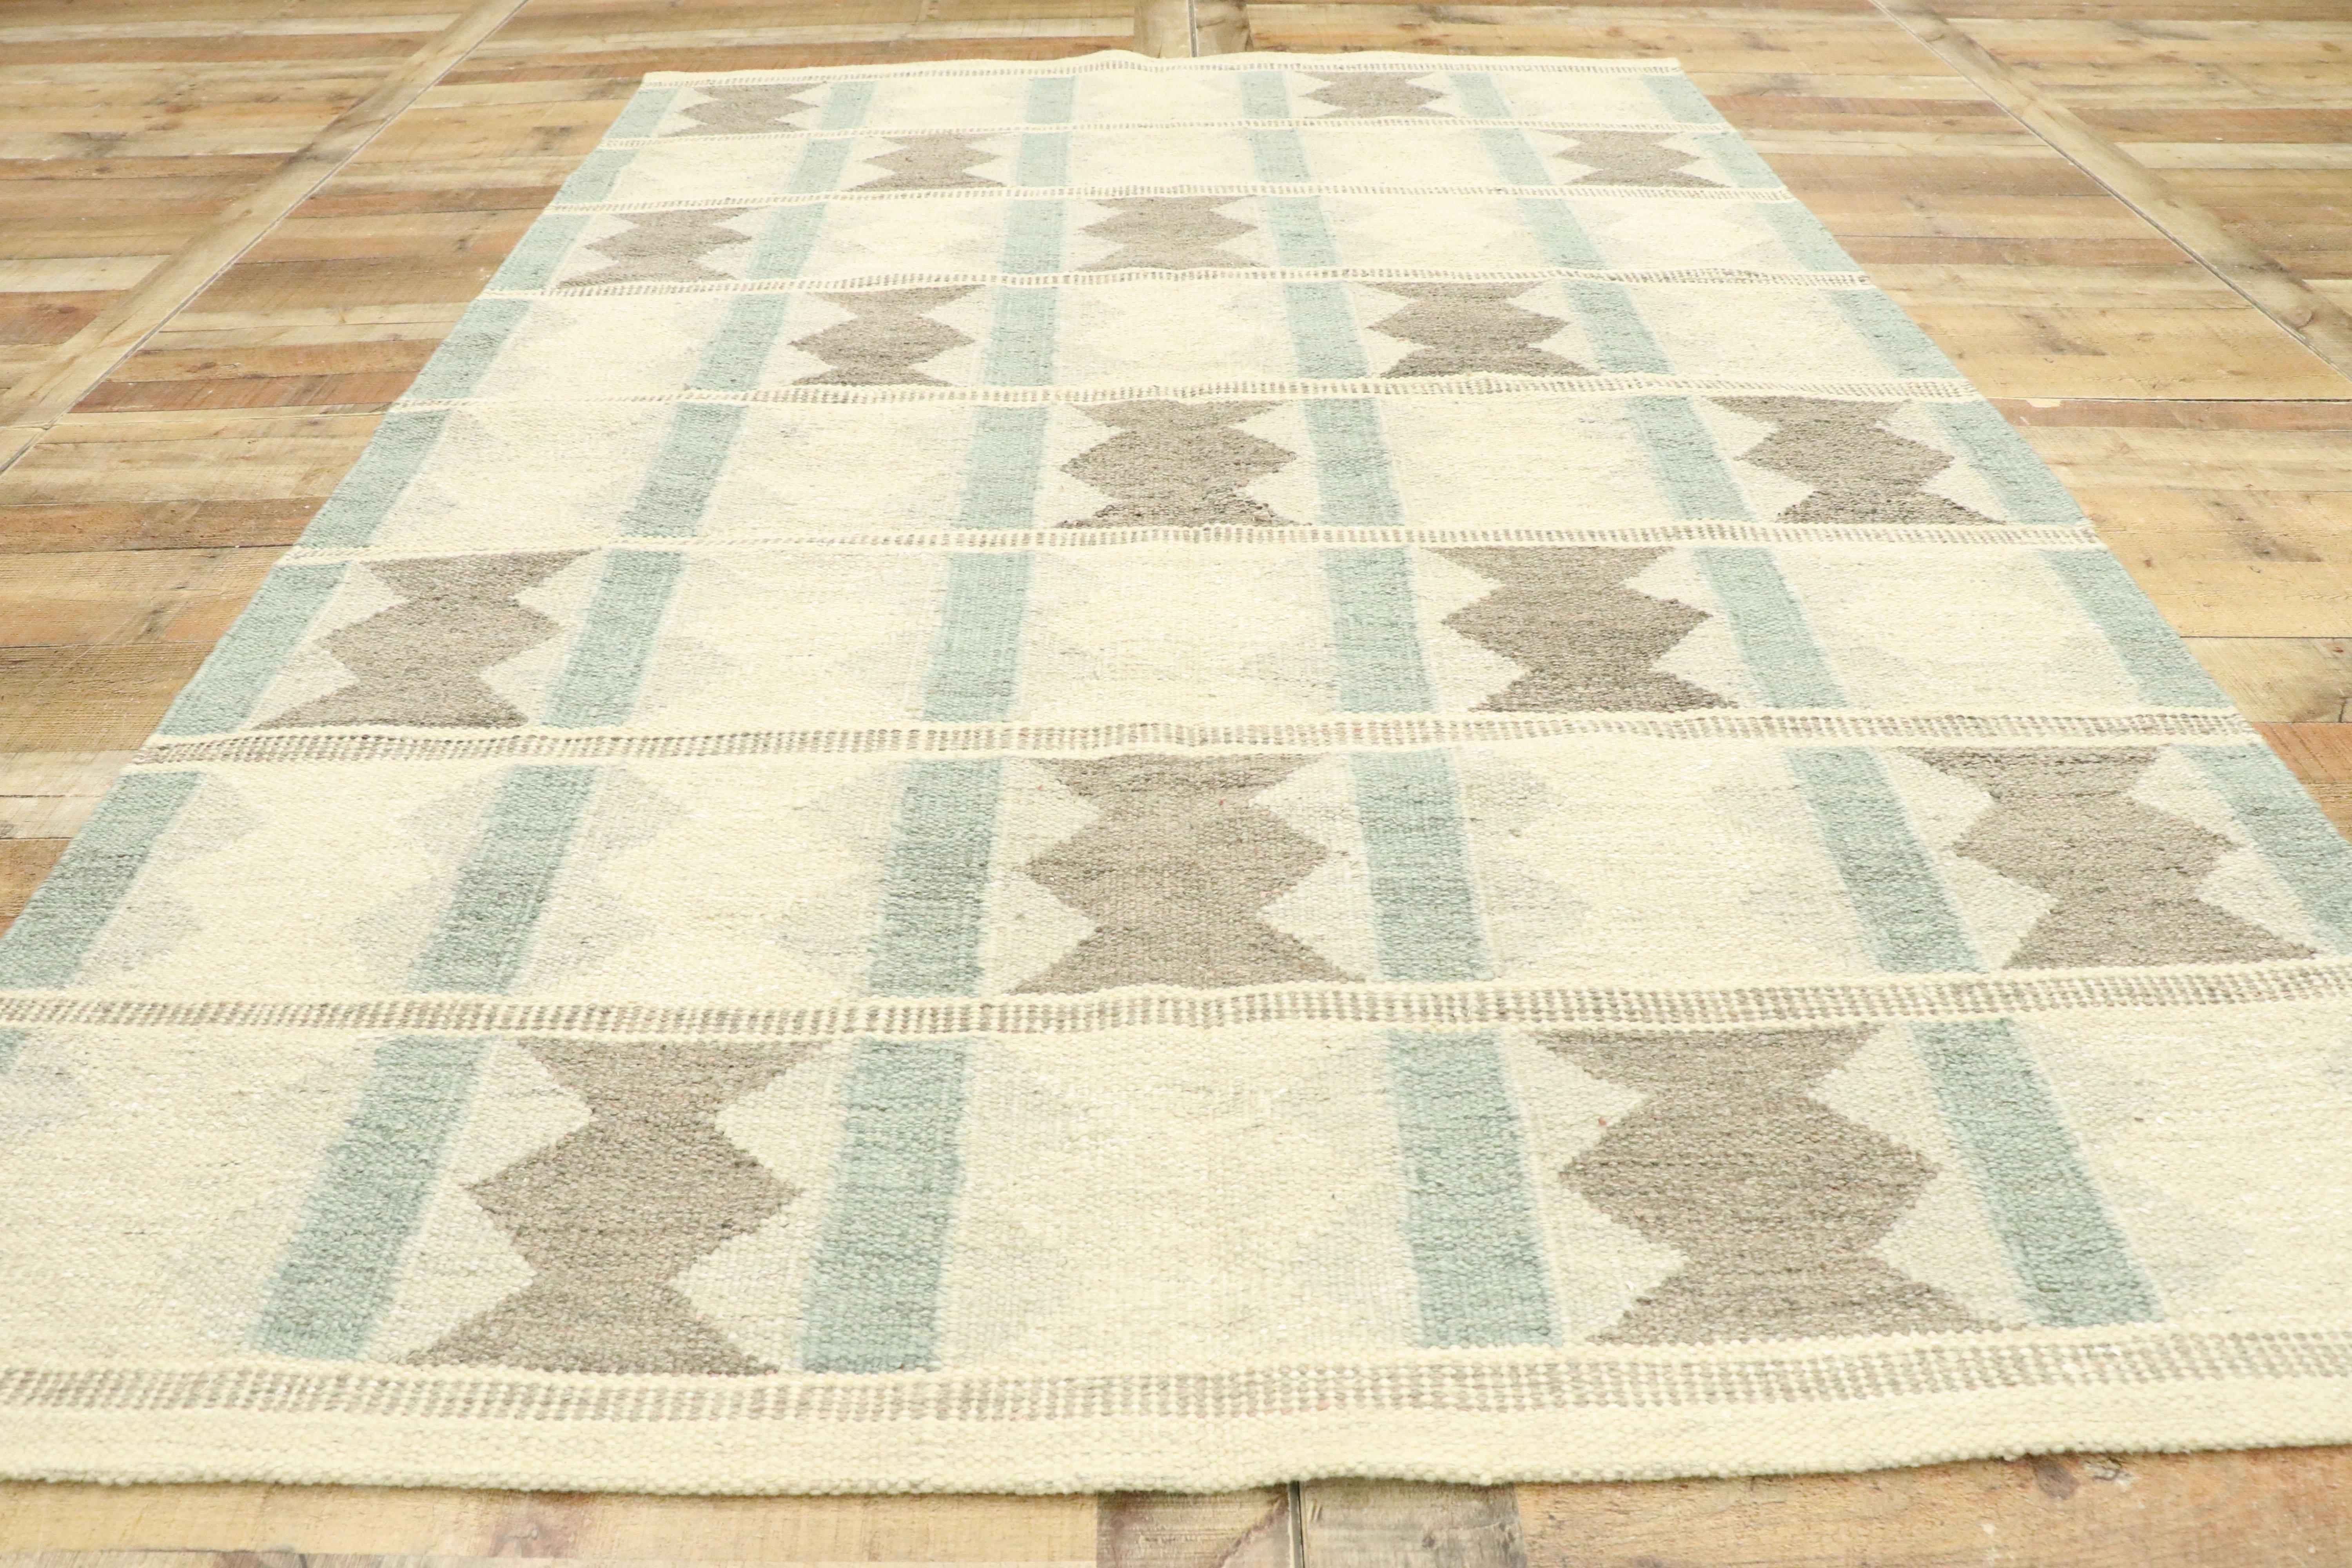 Hand-Woven New Contemporary Swedish Indian Kilim Rug with Scandinavian Modern Style 